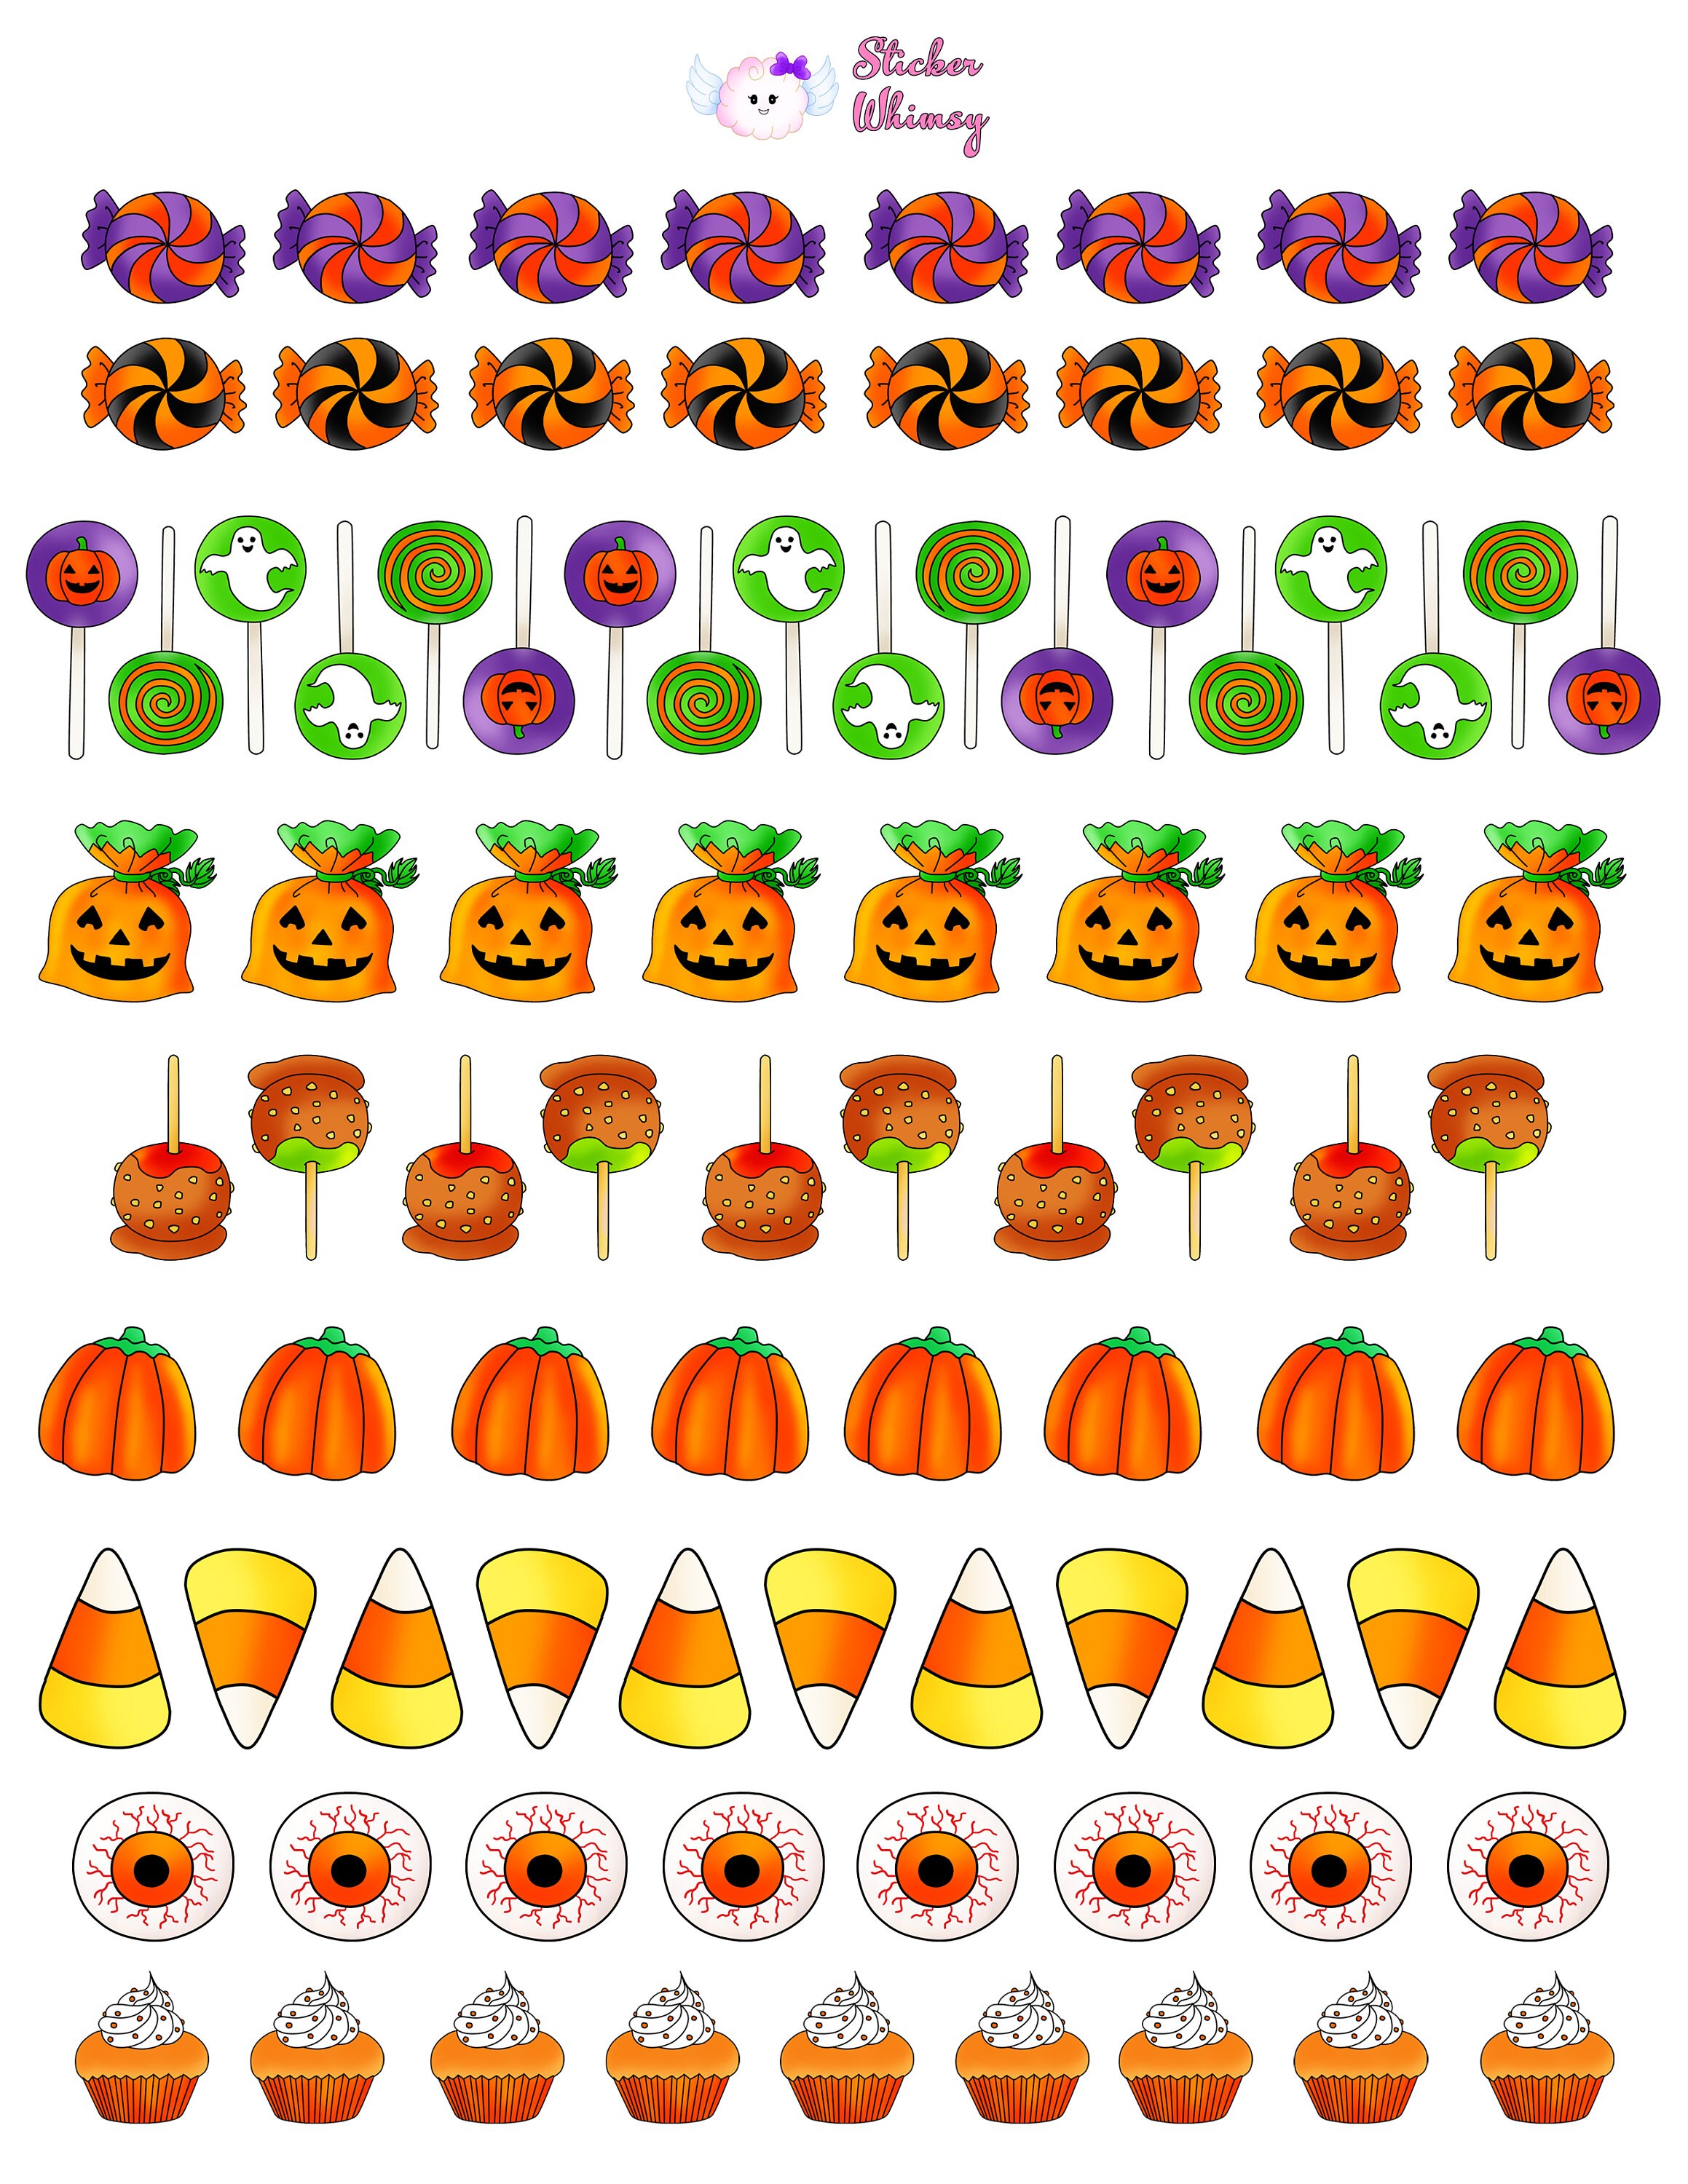 Halloween Eyeball Candy Planner Stickers, Printed Stickers, Cute Stickers,  Treats, Kawaii Stickers, Erin Condren, Functional, Colorful